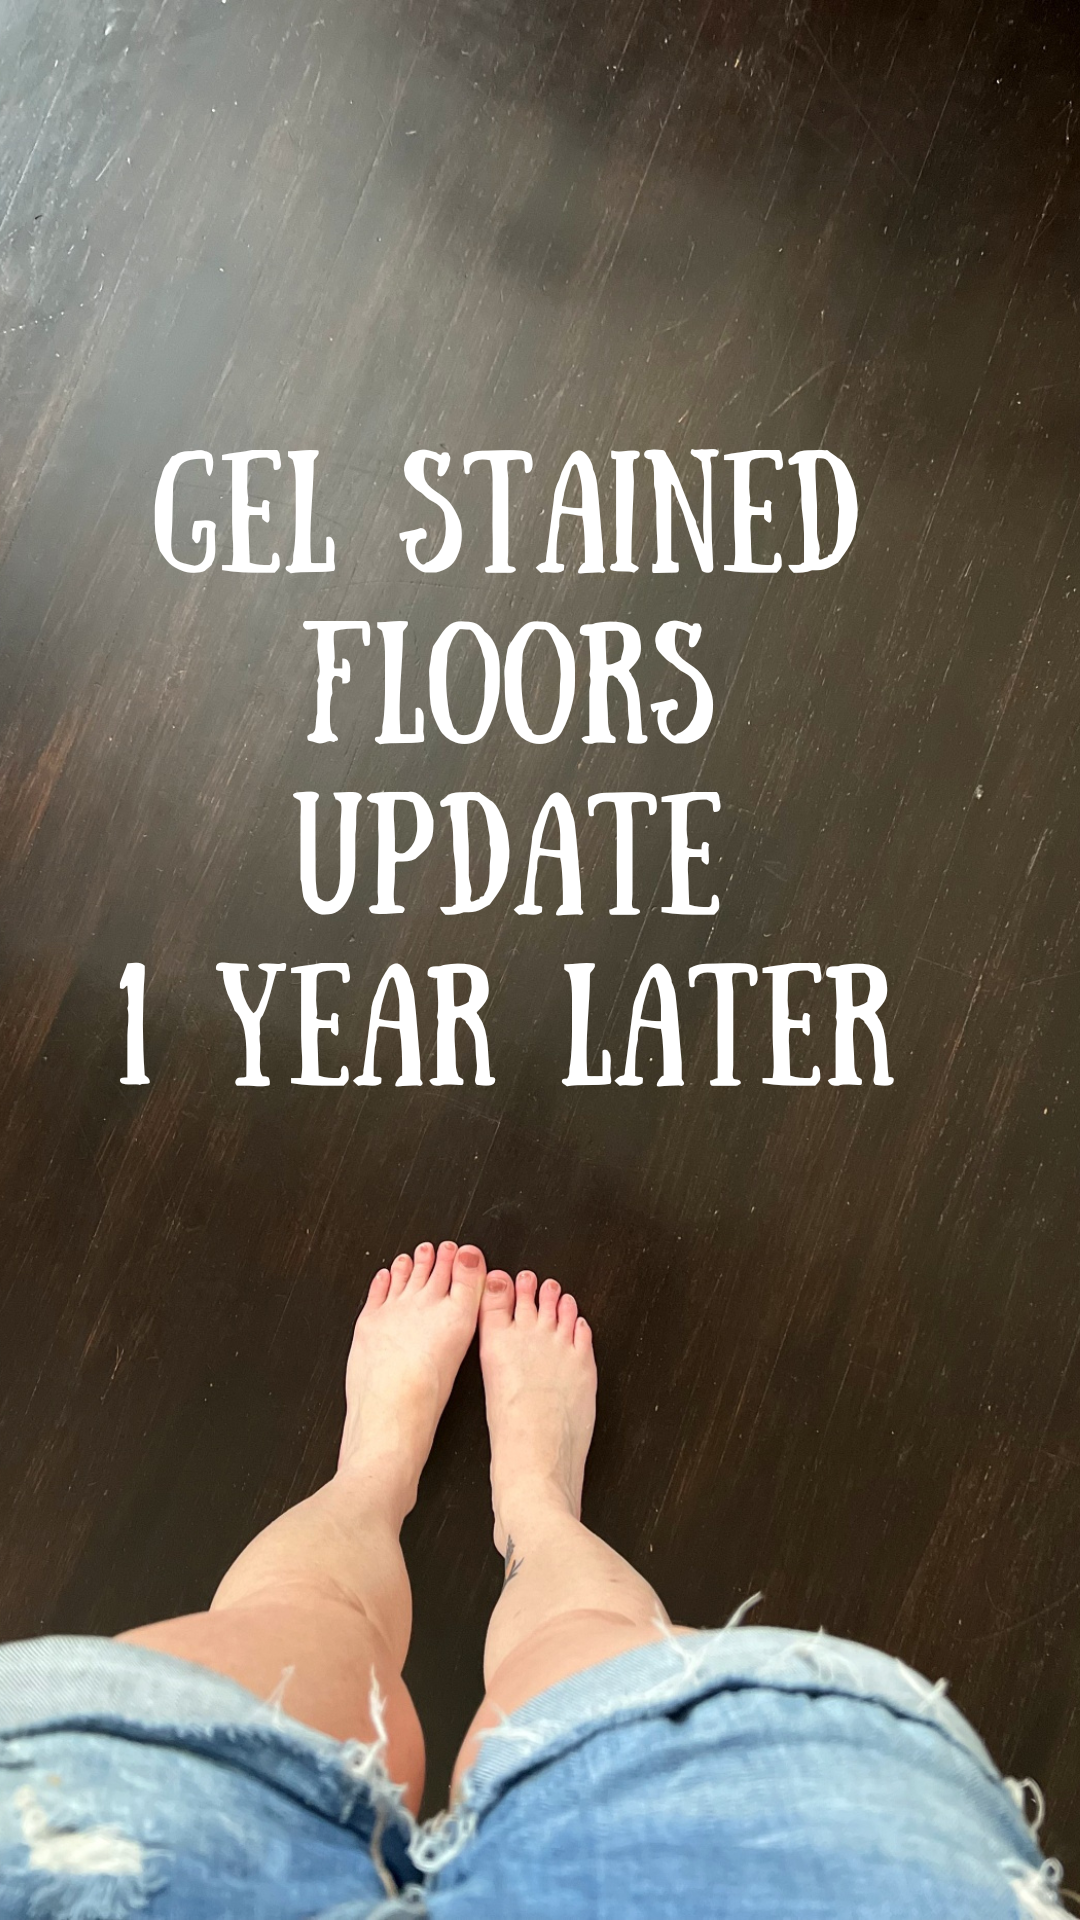 Our Gel Stained Floors UPDATE - 1 Year Later